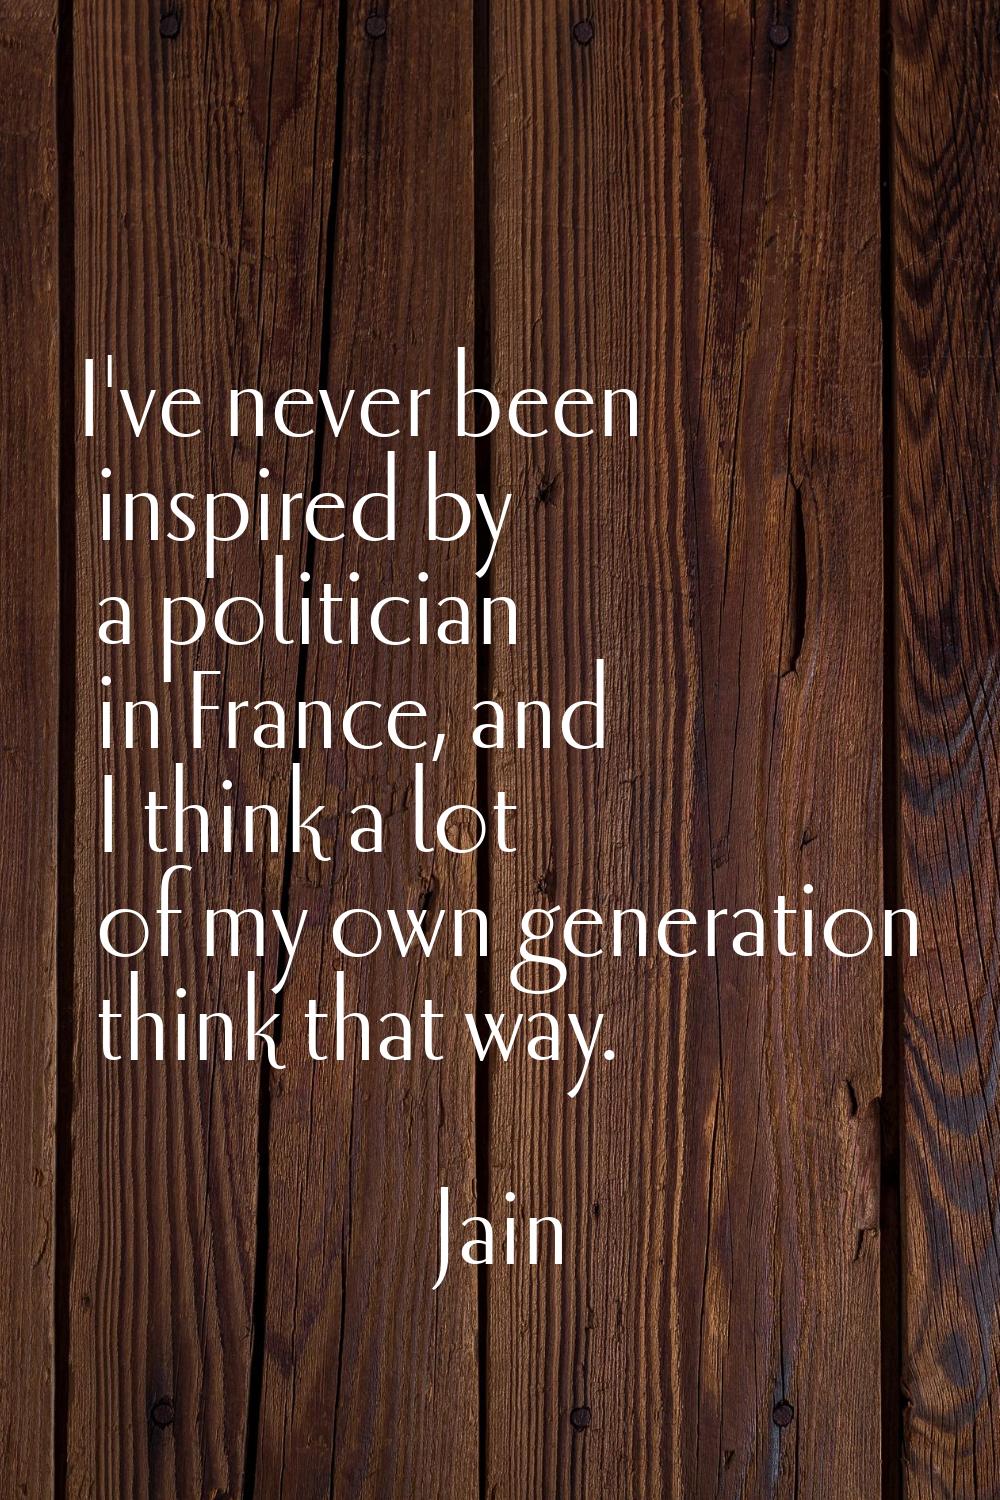 I've never been inspired by a politician in France, and I think a lot of my own generation think th